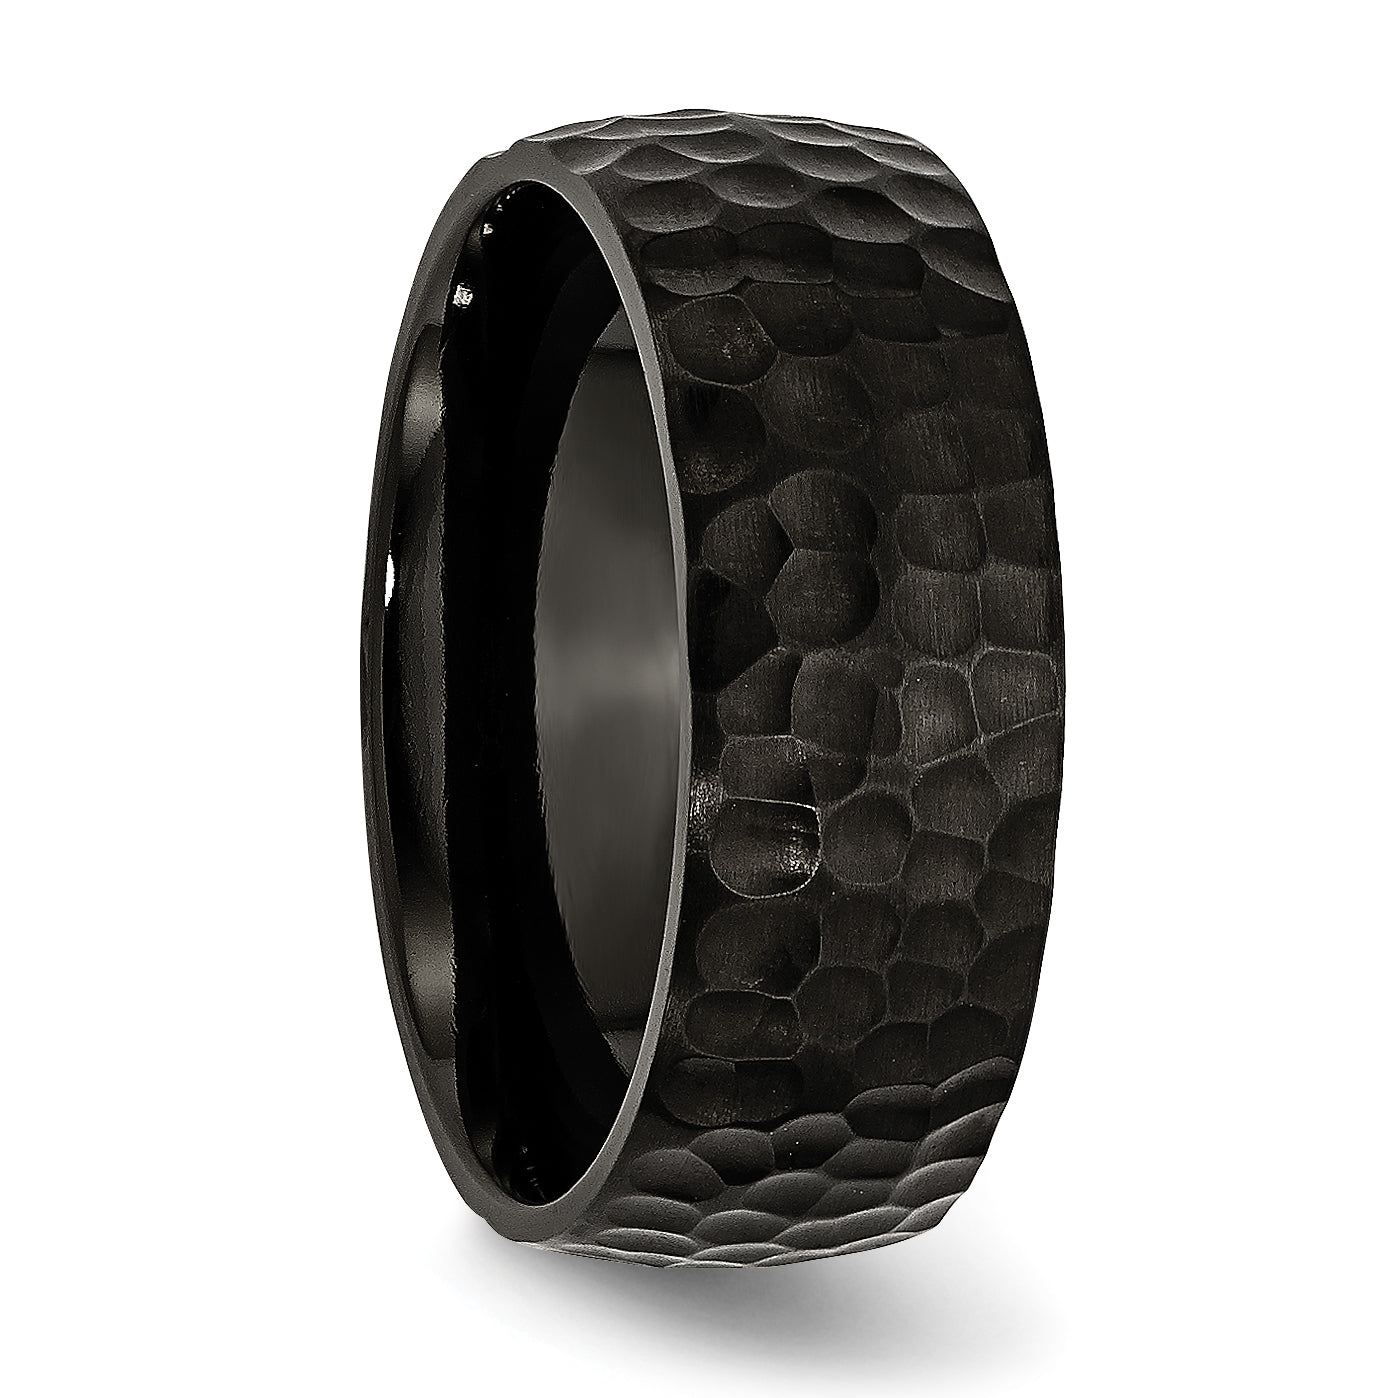 Titanium Brushed and Polished Hammered Black IP-plated 8mm Band